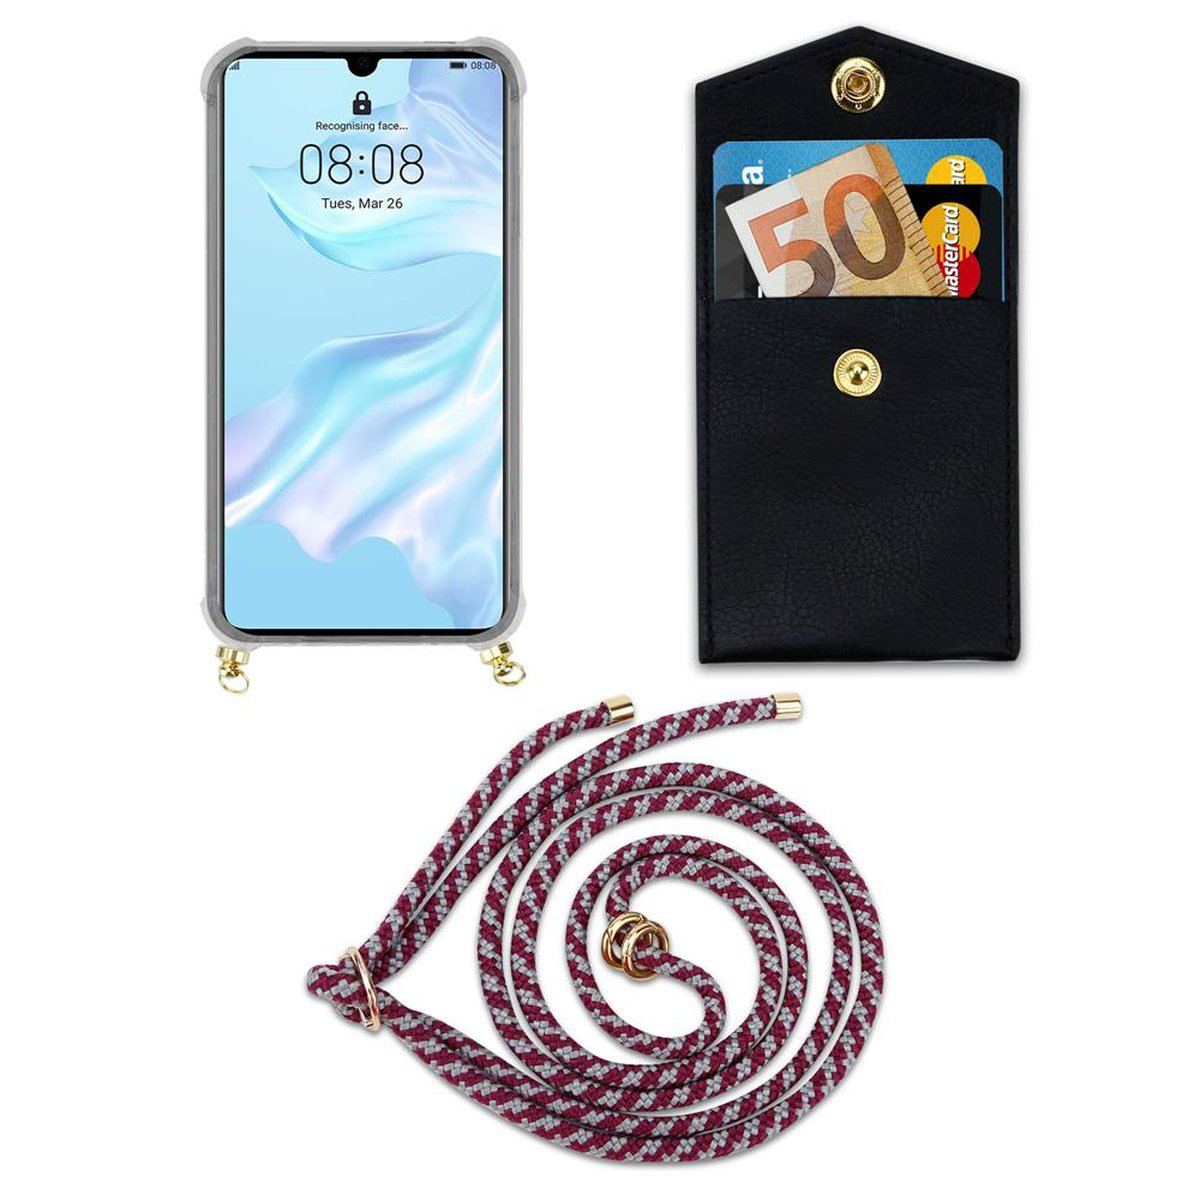 CADORABO Handy Kette mit Backcover, Hülle, WEIß P30, Ringen, und Gold Kordel ROT abnehmbarer Band Huawei